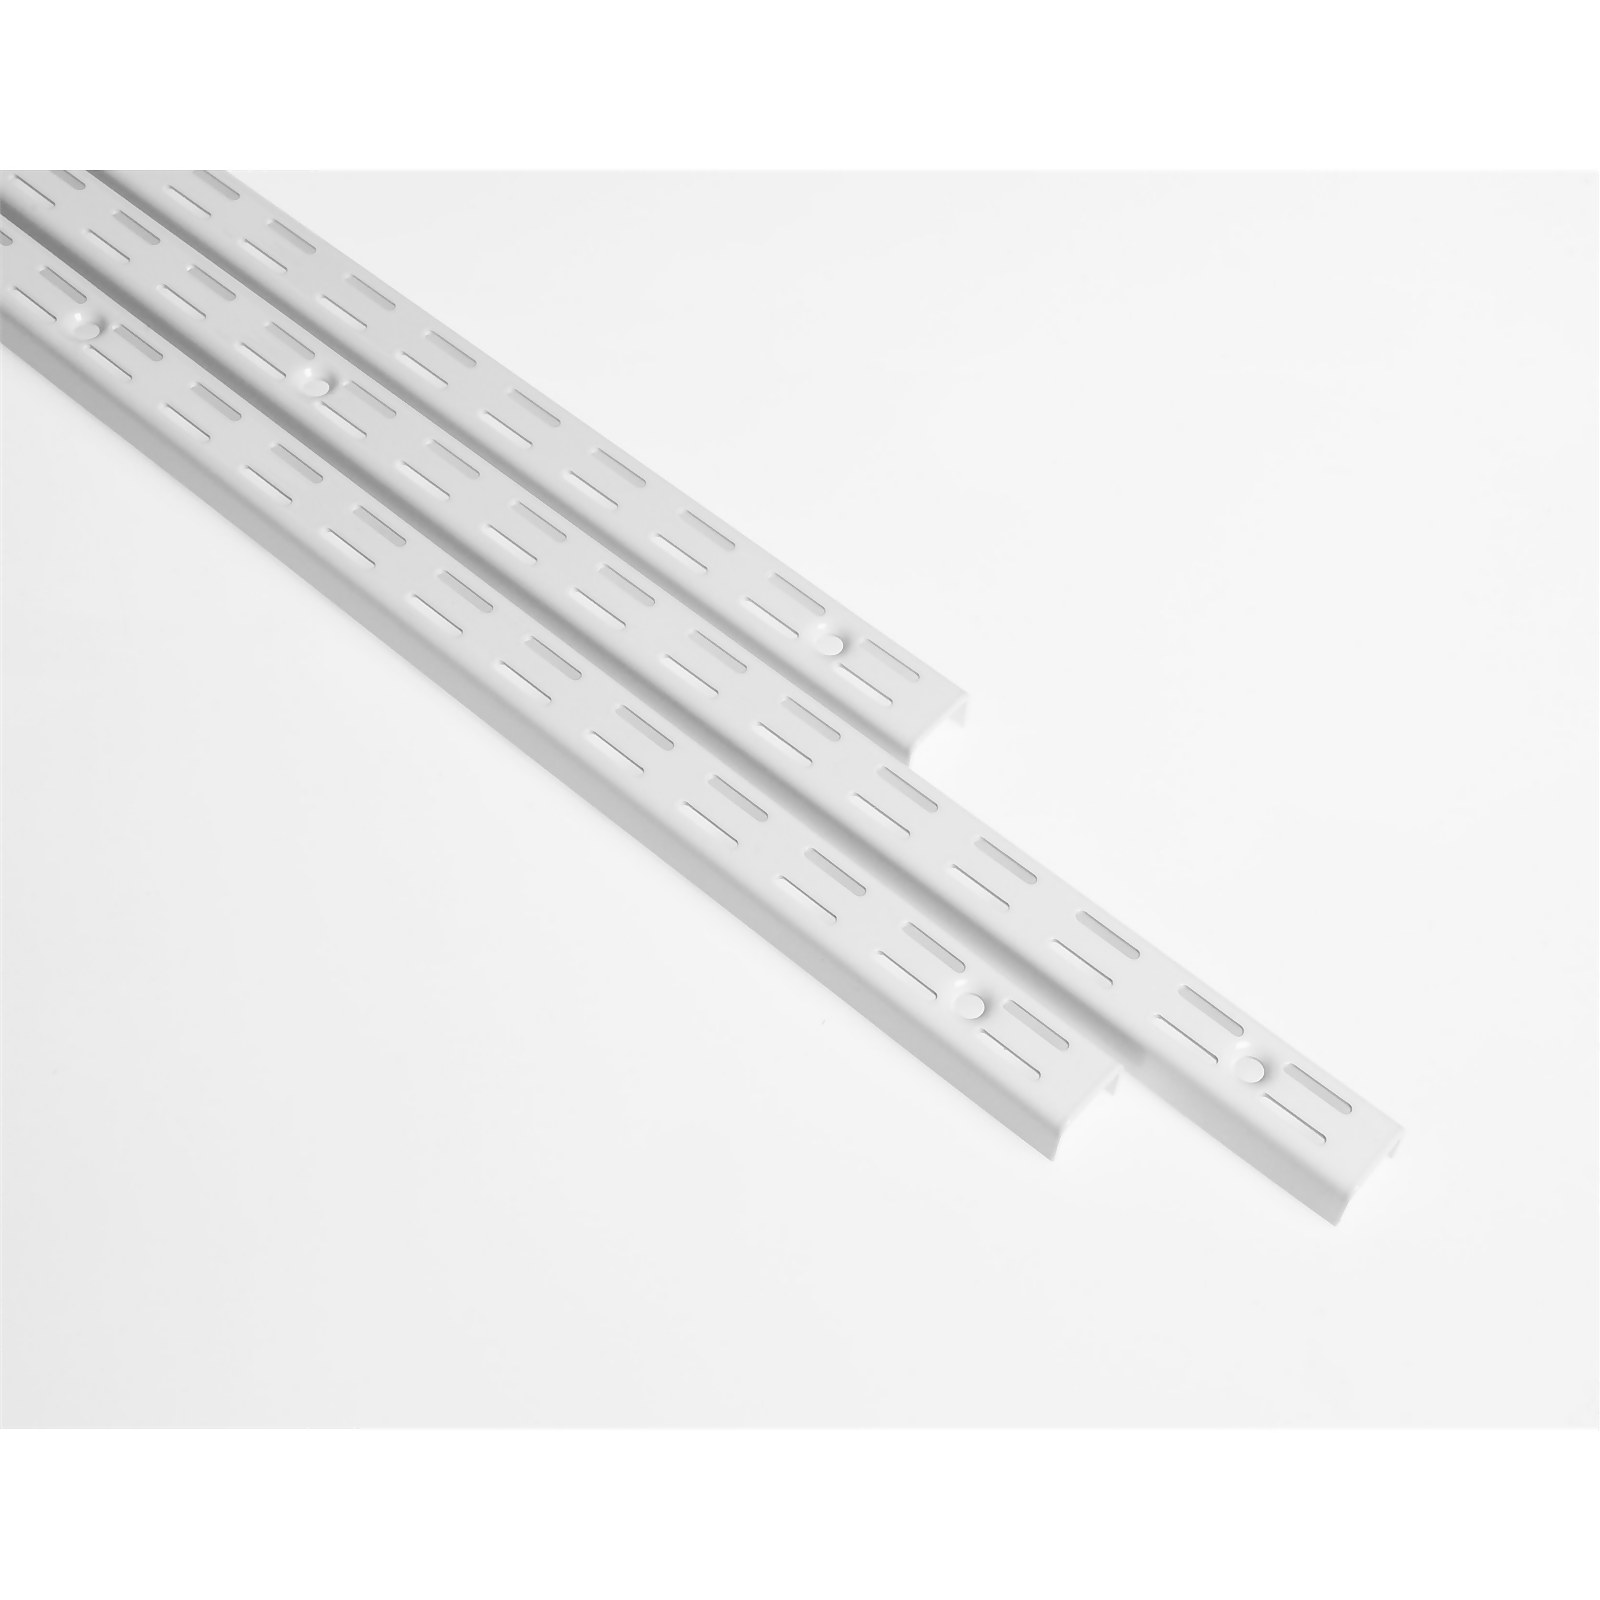 Photo of Anti-bacterial Twin Slot Shelving Kit - 1981mm White Twinslot And 270mm Brackets - White